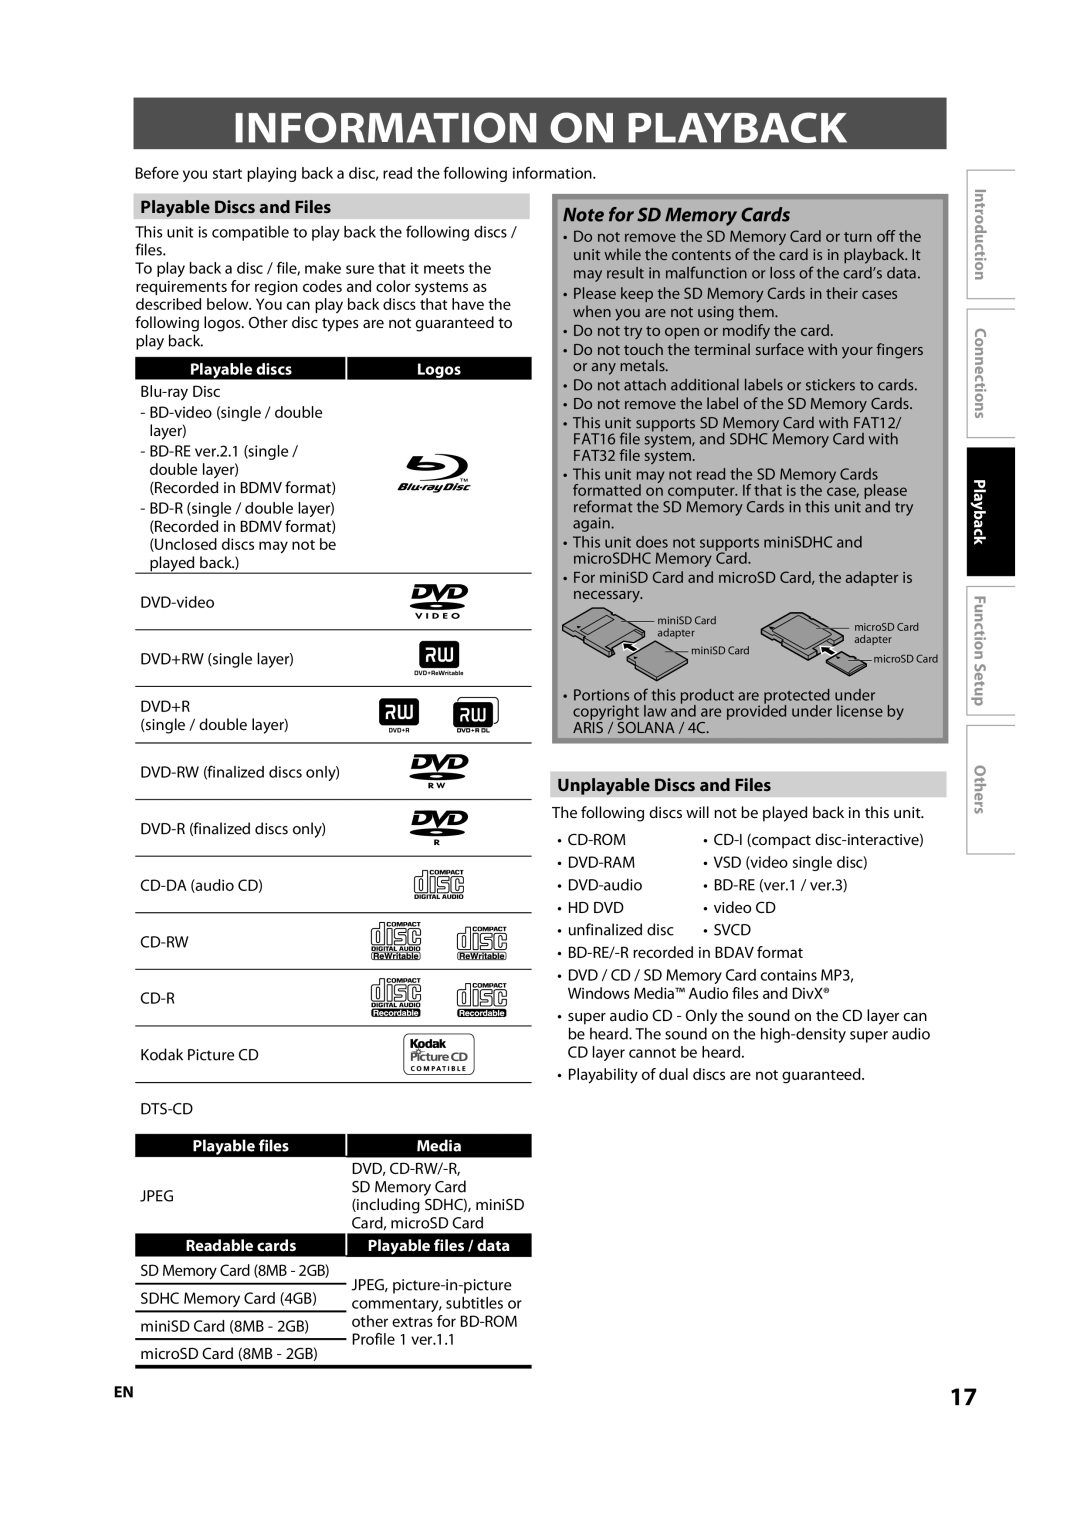 Sylvania NB500SL9 Information On Playback, Note for SD Memory Cards, Playable Discs and Files, Unplayable Discs and Files 